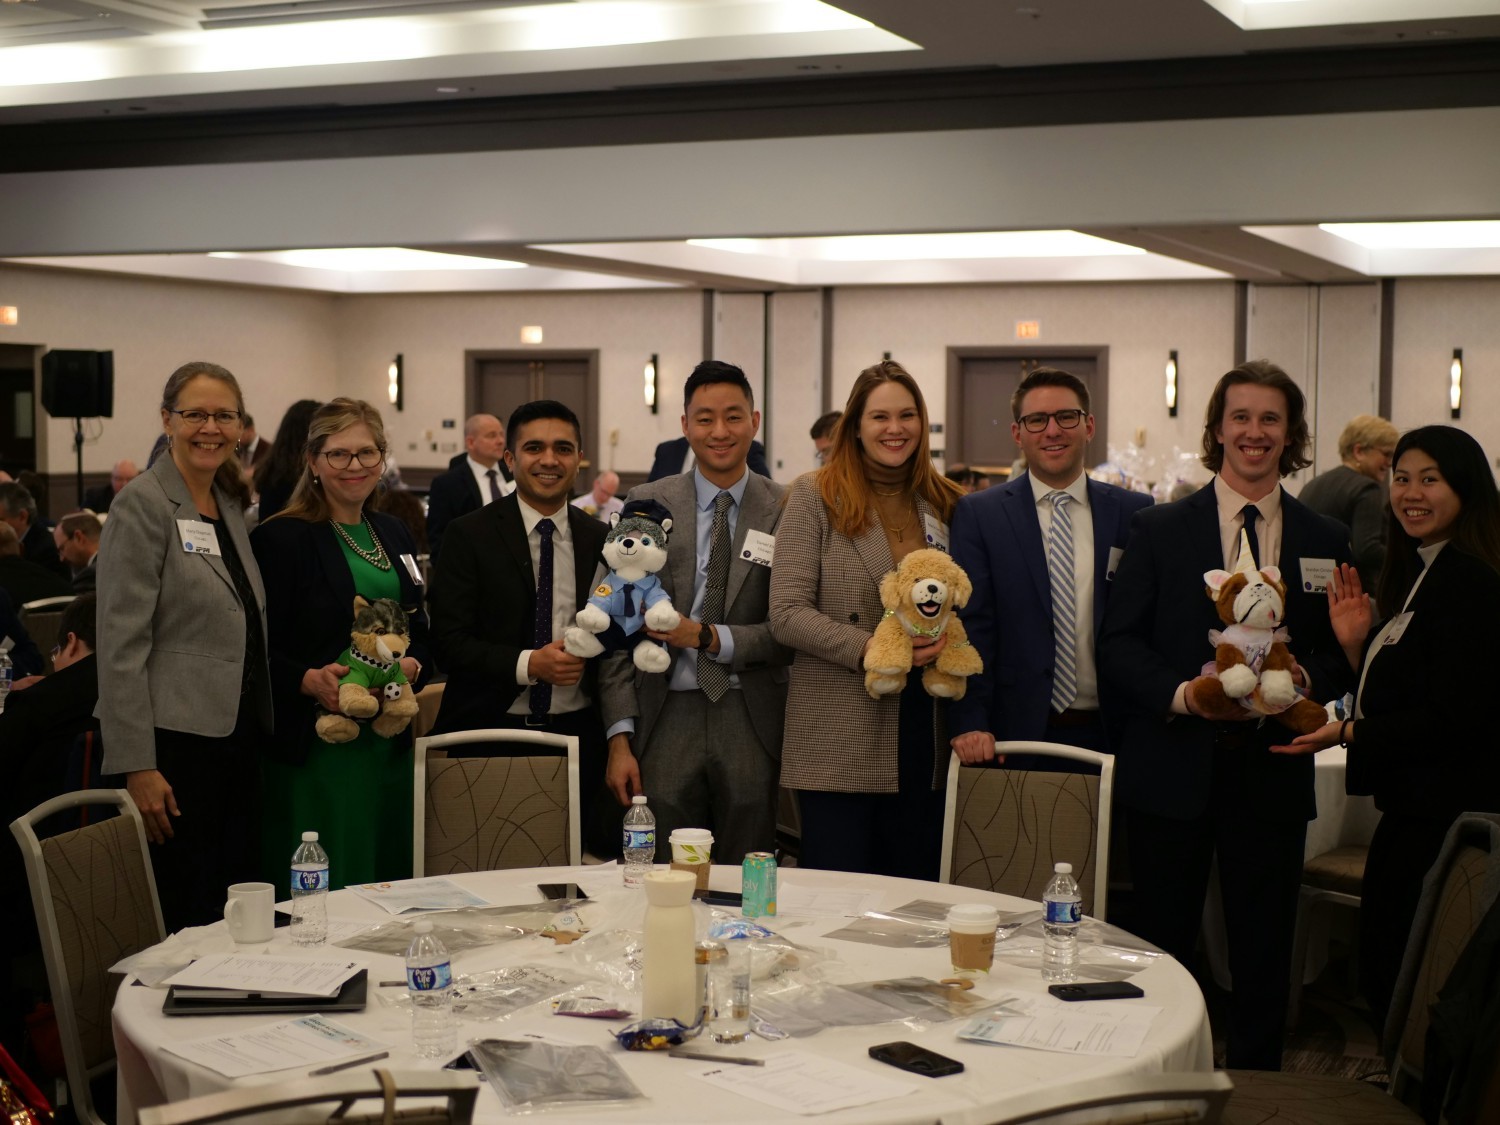 Group of IPMers posing with their stuff animals they built for a charity event.